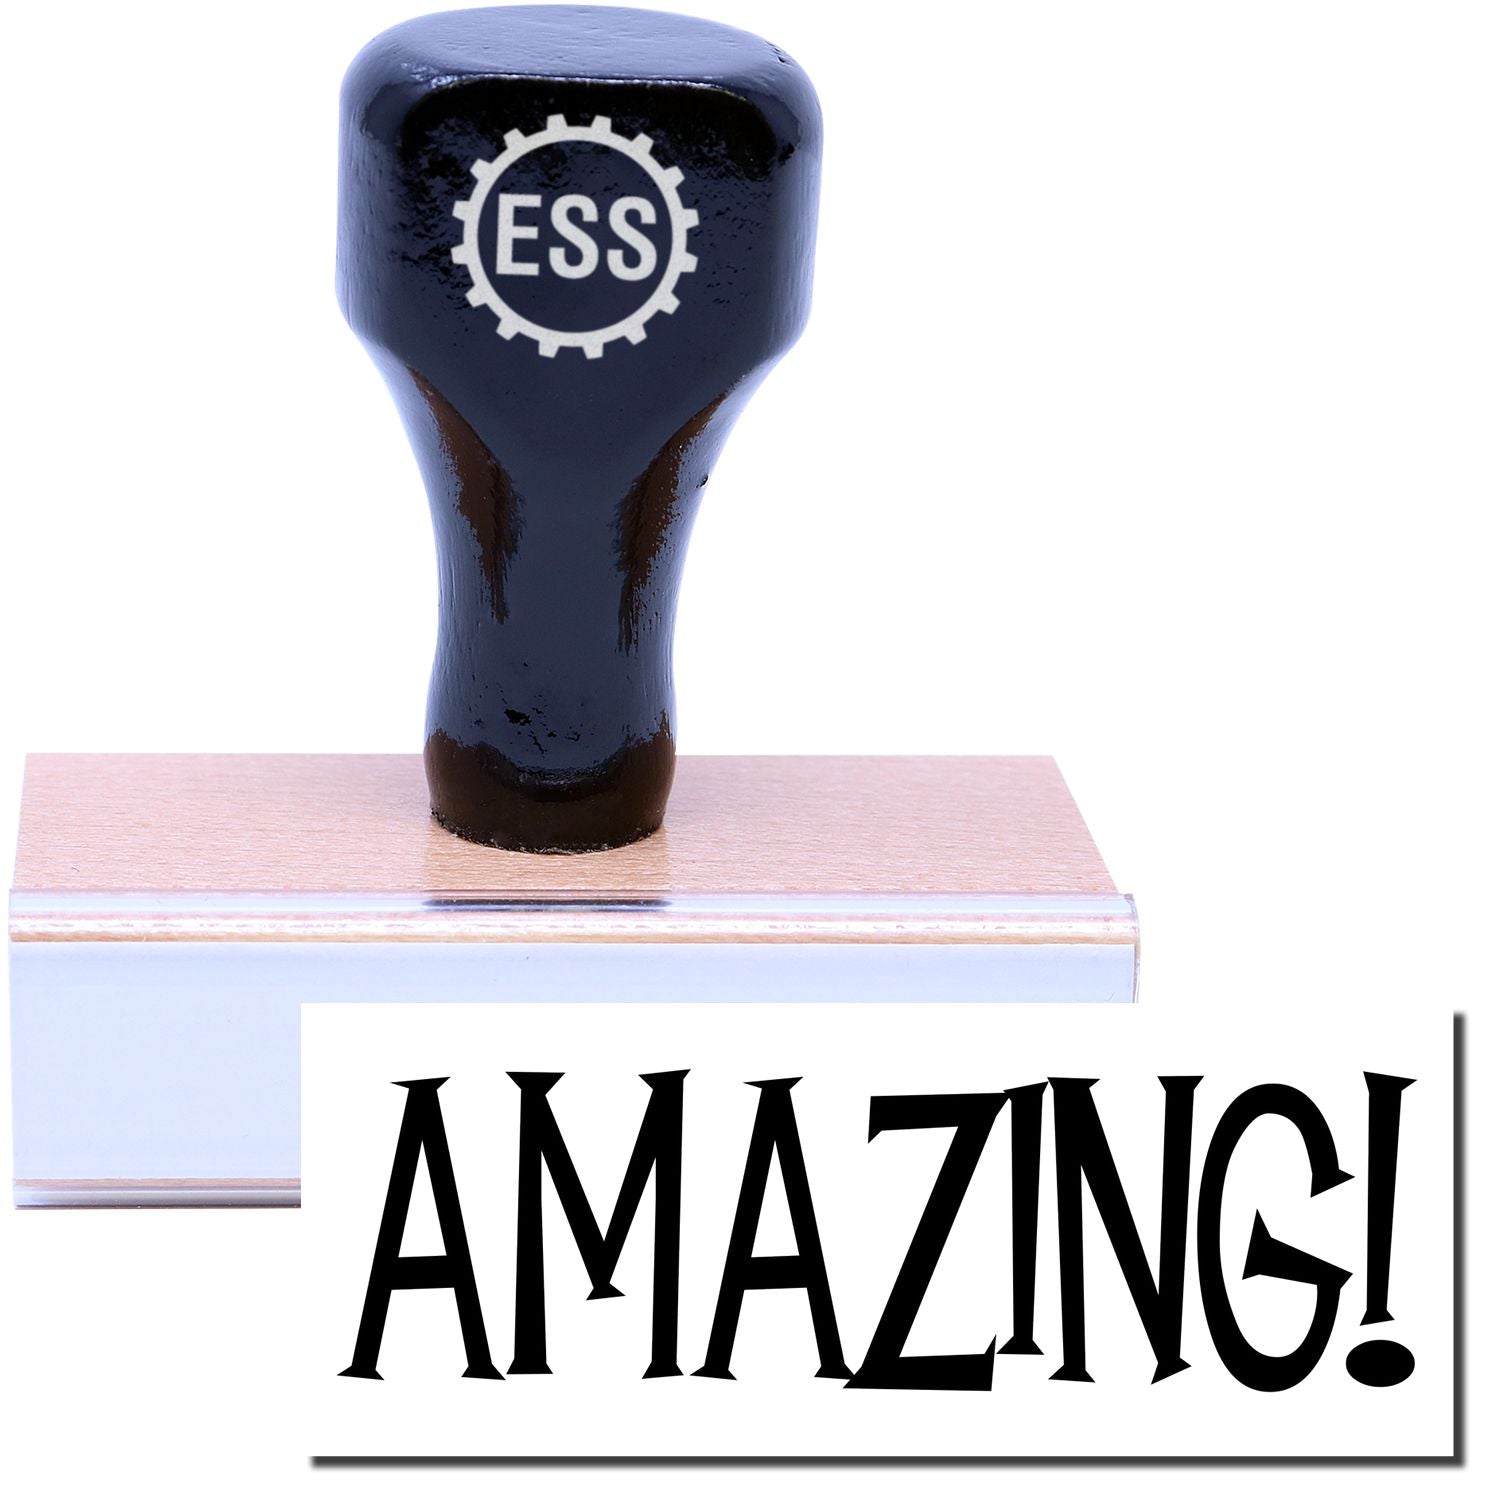 A stock office rubber stamp with a stamped image showing how the text "AMAZING!" is displayed after stamping.